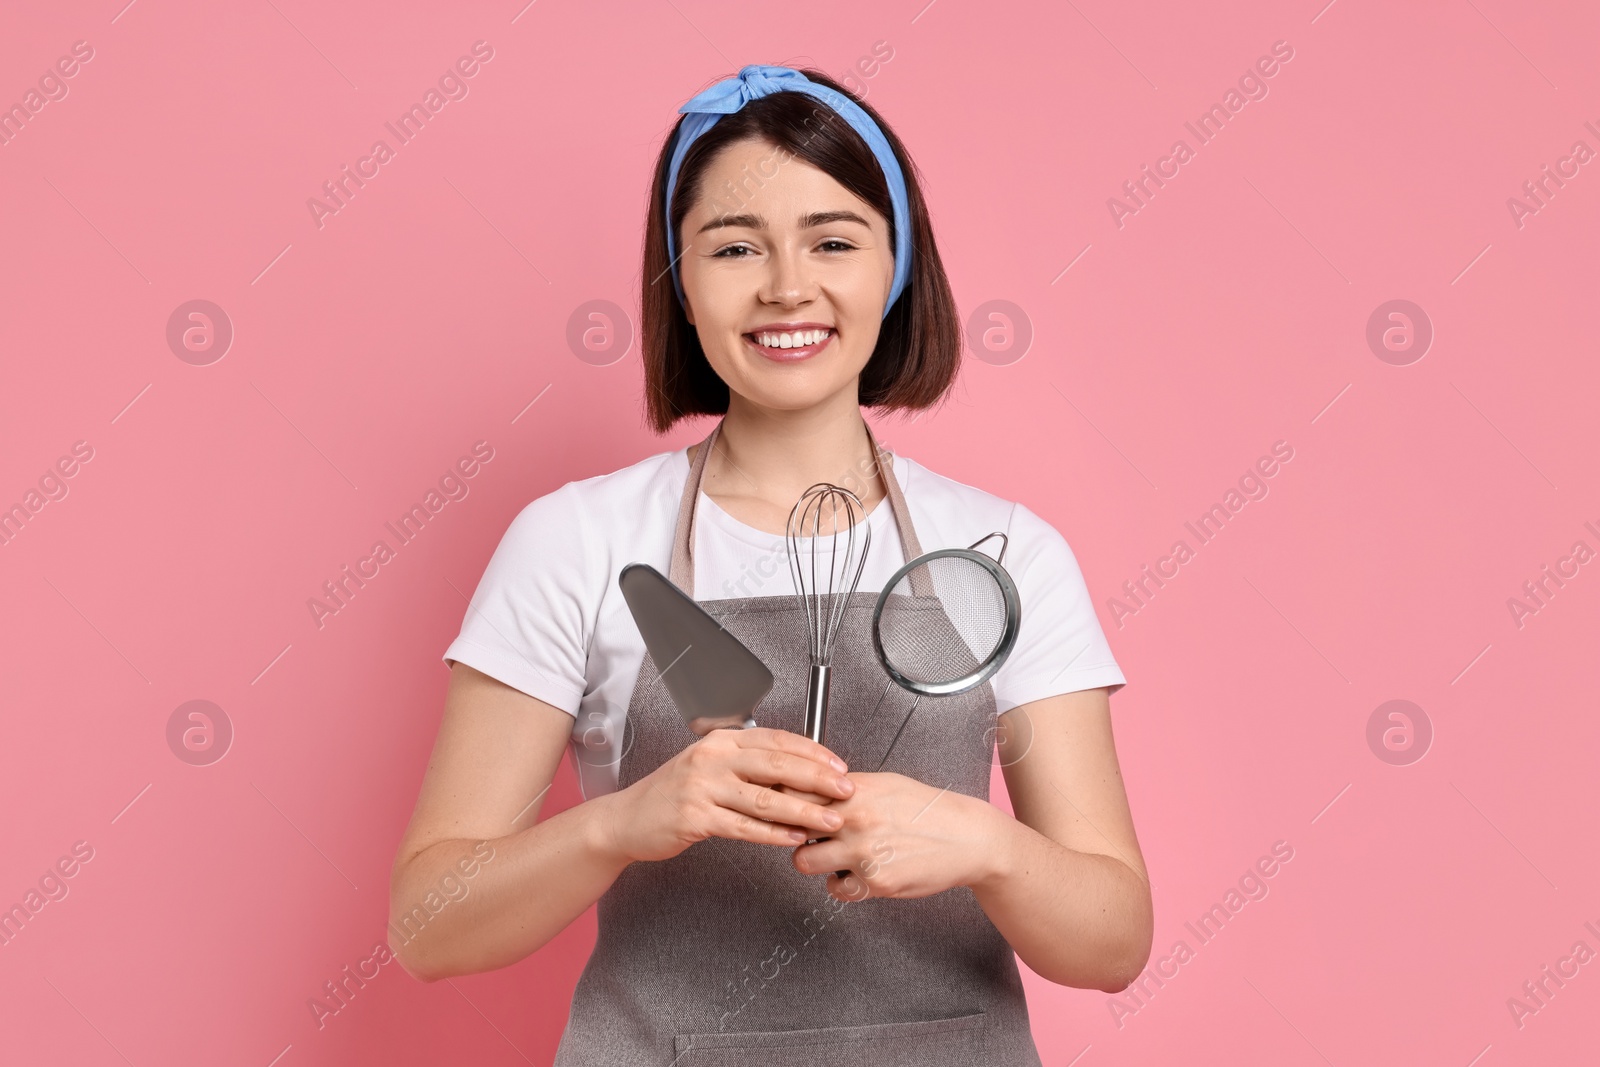 Photo of Happy confectioner with professional tools on pink background